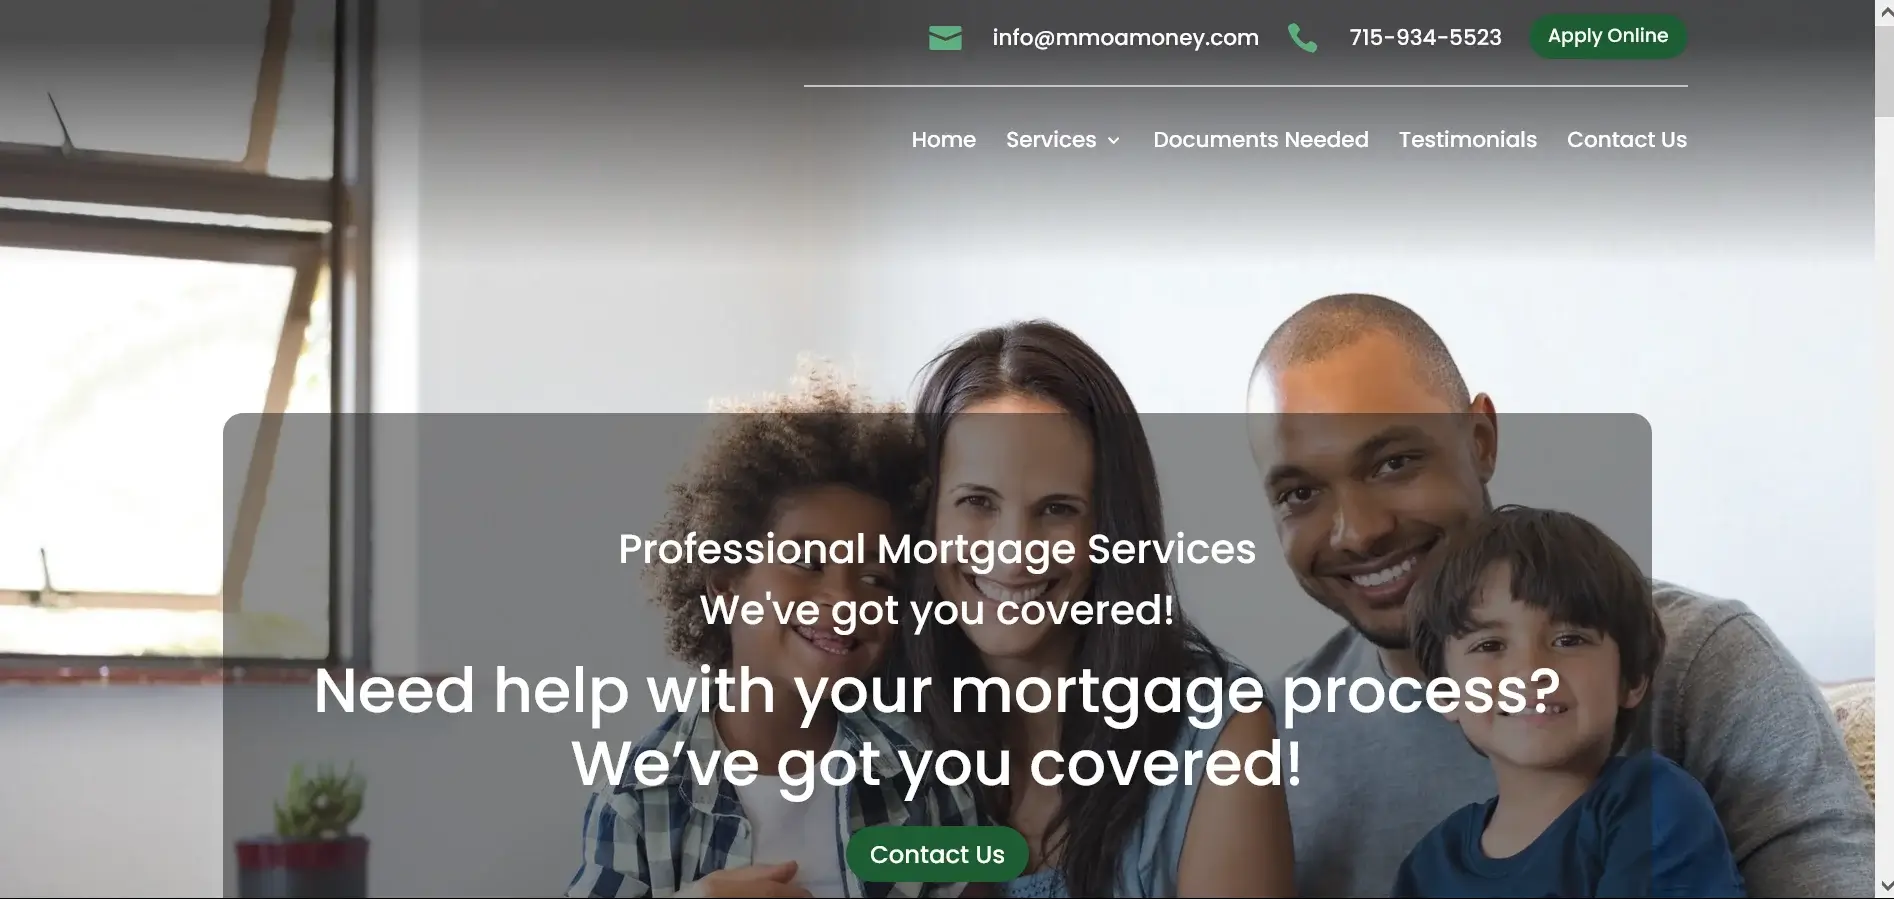 Midwest Mortgage Of American Corporation